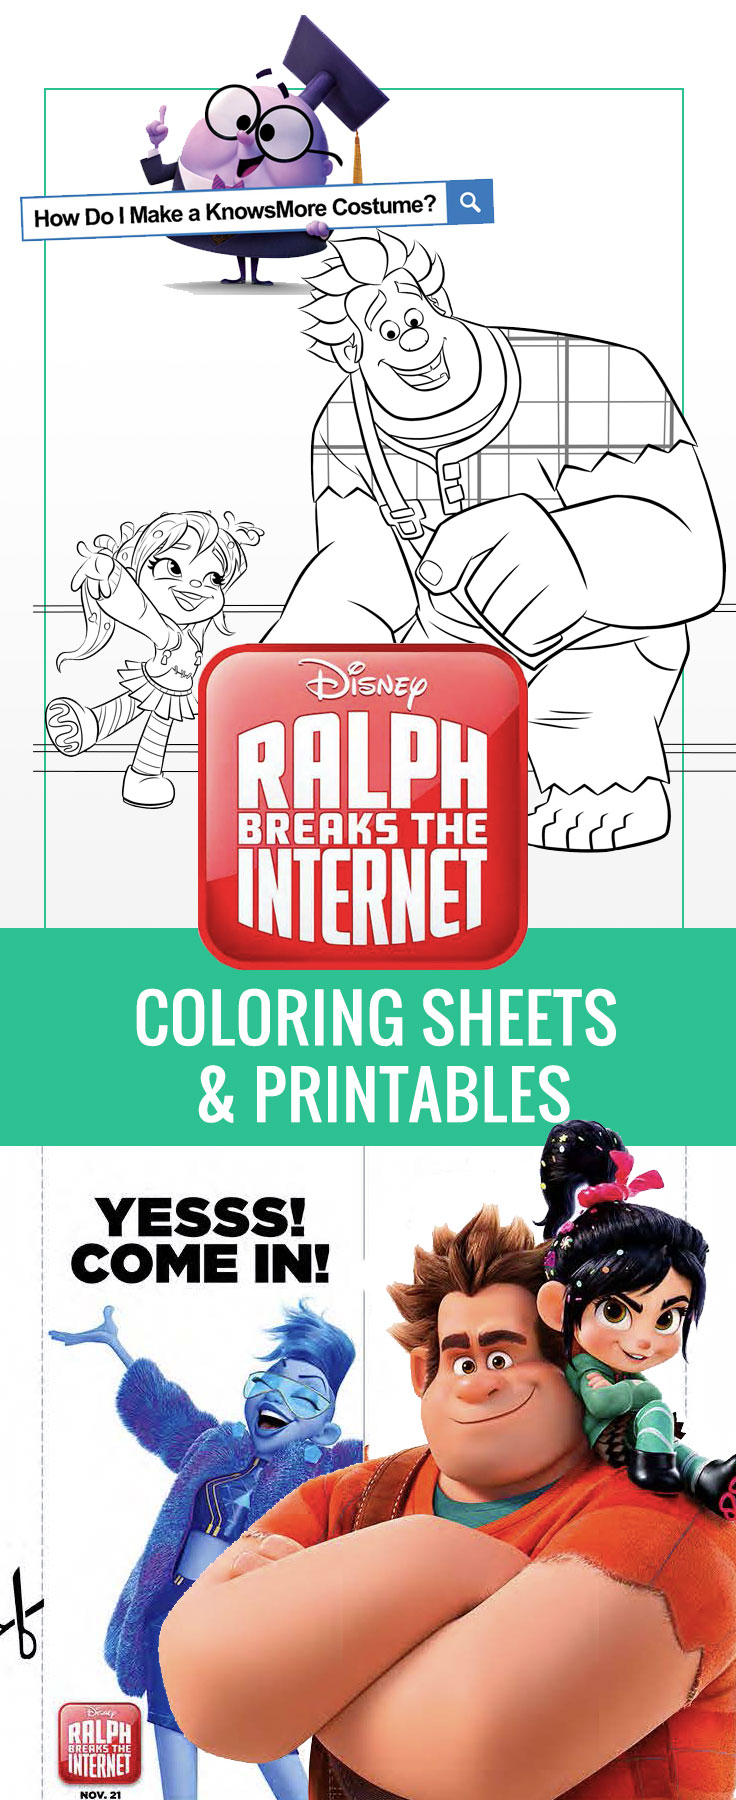 Ralph Breaks The Internet coloring sheets & printables